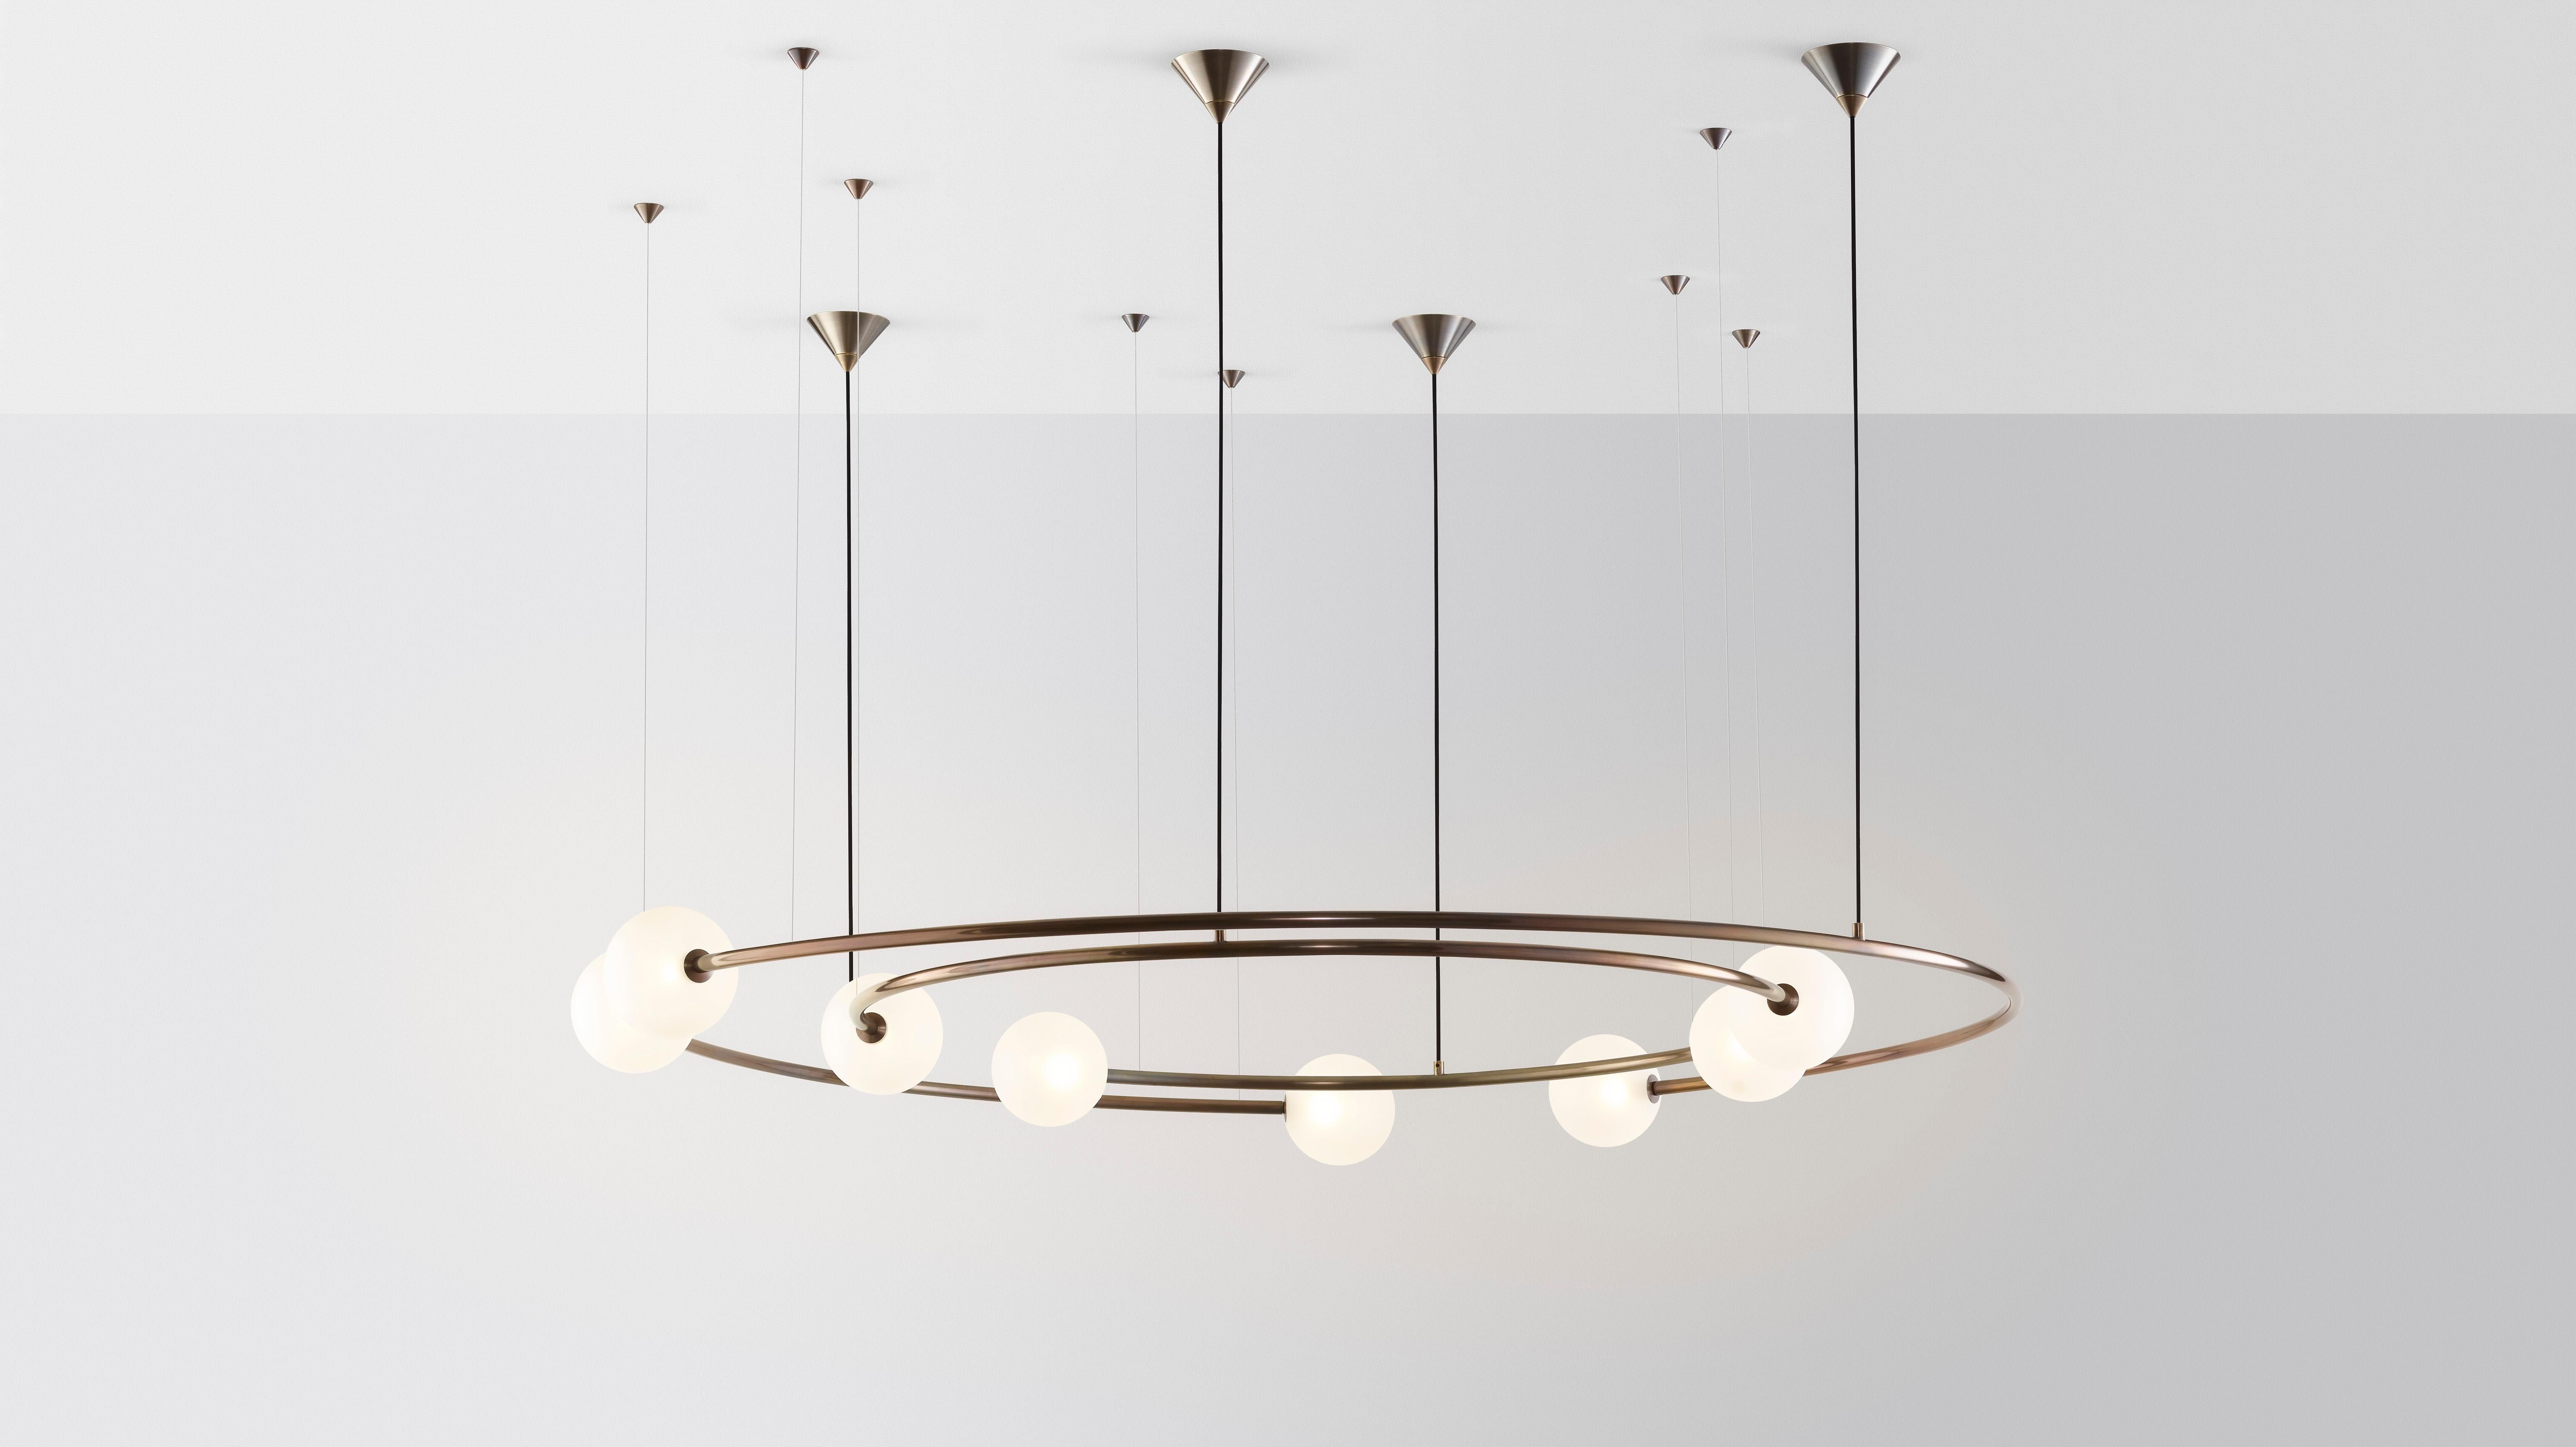 Oddments by Volker Haug 
Dual ring Configuration
Dimensions: W 95 D 160 H 40 cm
Materials: Polished or bronzed brass
Finish: Raw, satin lacquer or enamel
Cord / cable: Black fabric / stainless steel
Suspension: minimum 40 cm

Lamp: G9 - LED or